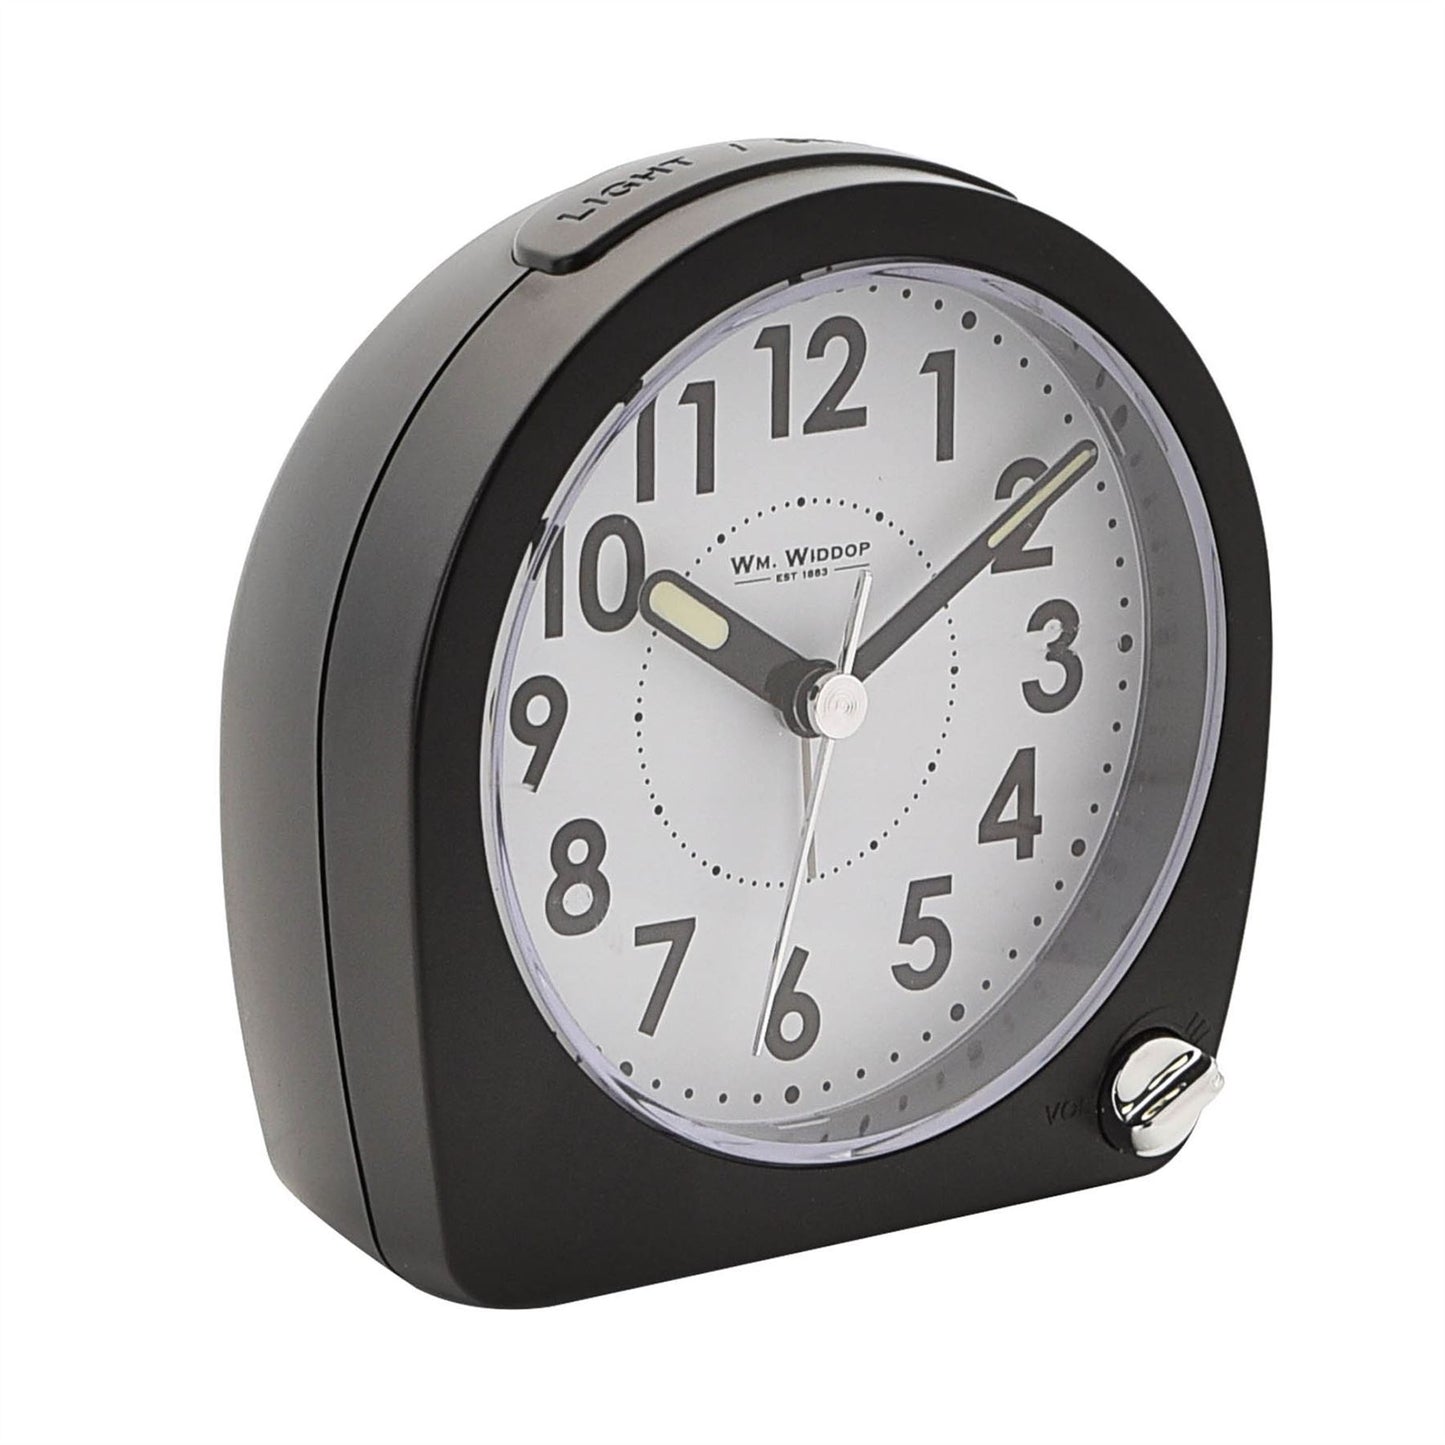 Wm. Widdop Round Alarm Clock Light, Snooze, Sweep 5375 Available Multiple Colour